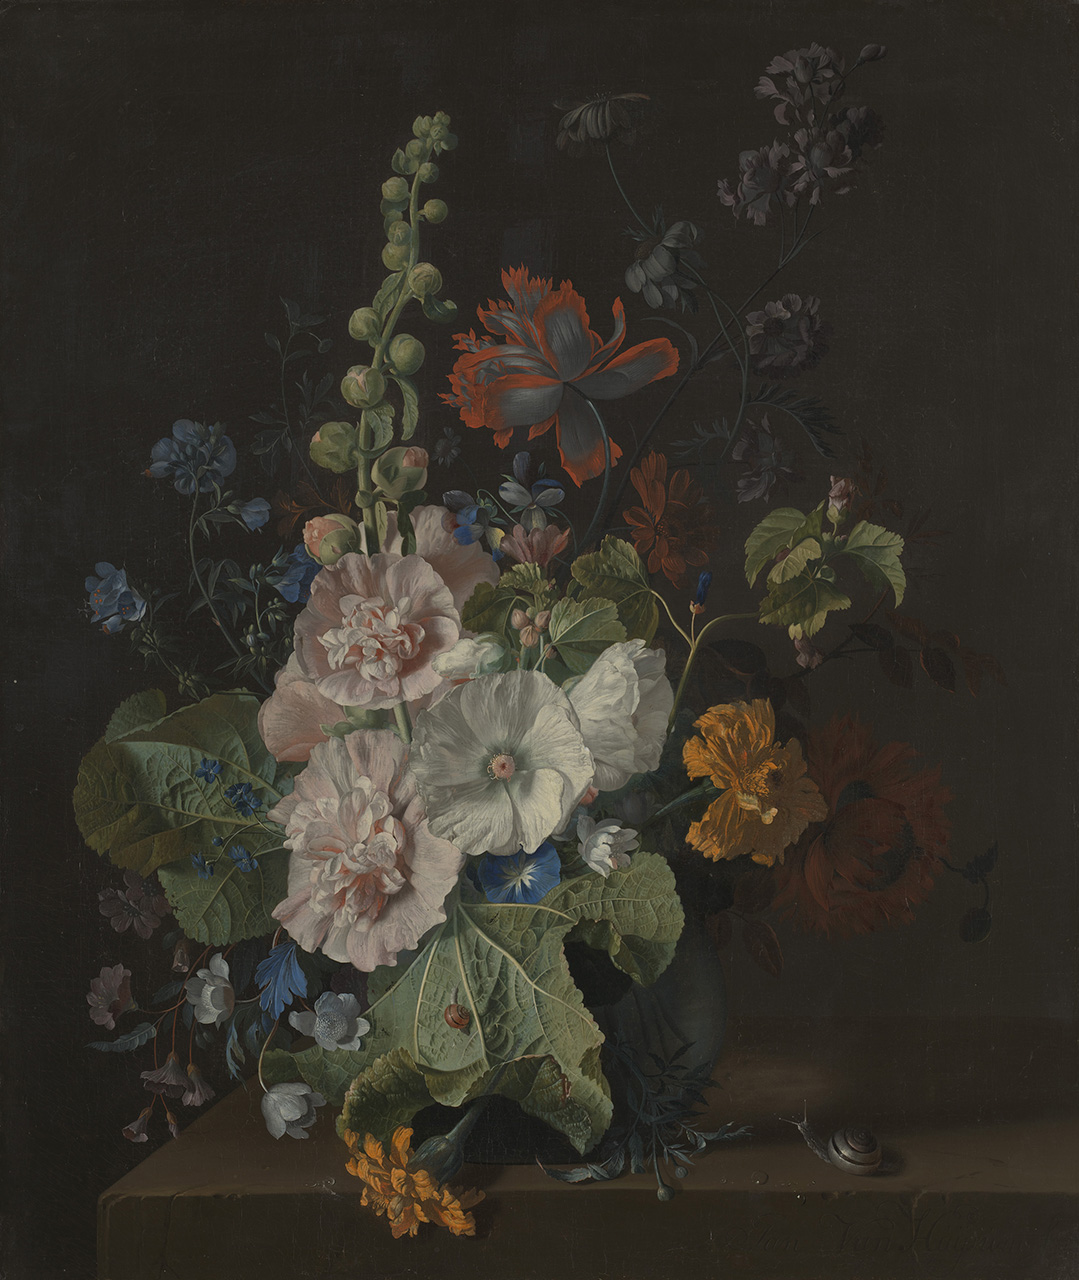 An arrangement of white, pink, blue, red and yellow flowers against a dark background.